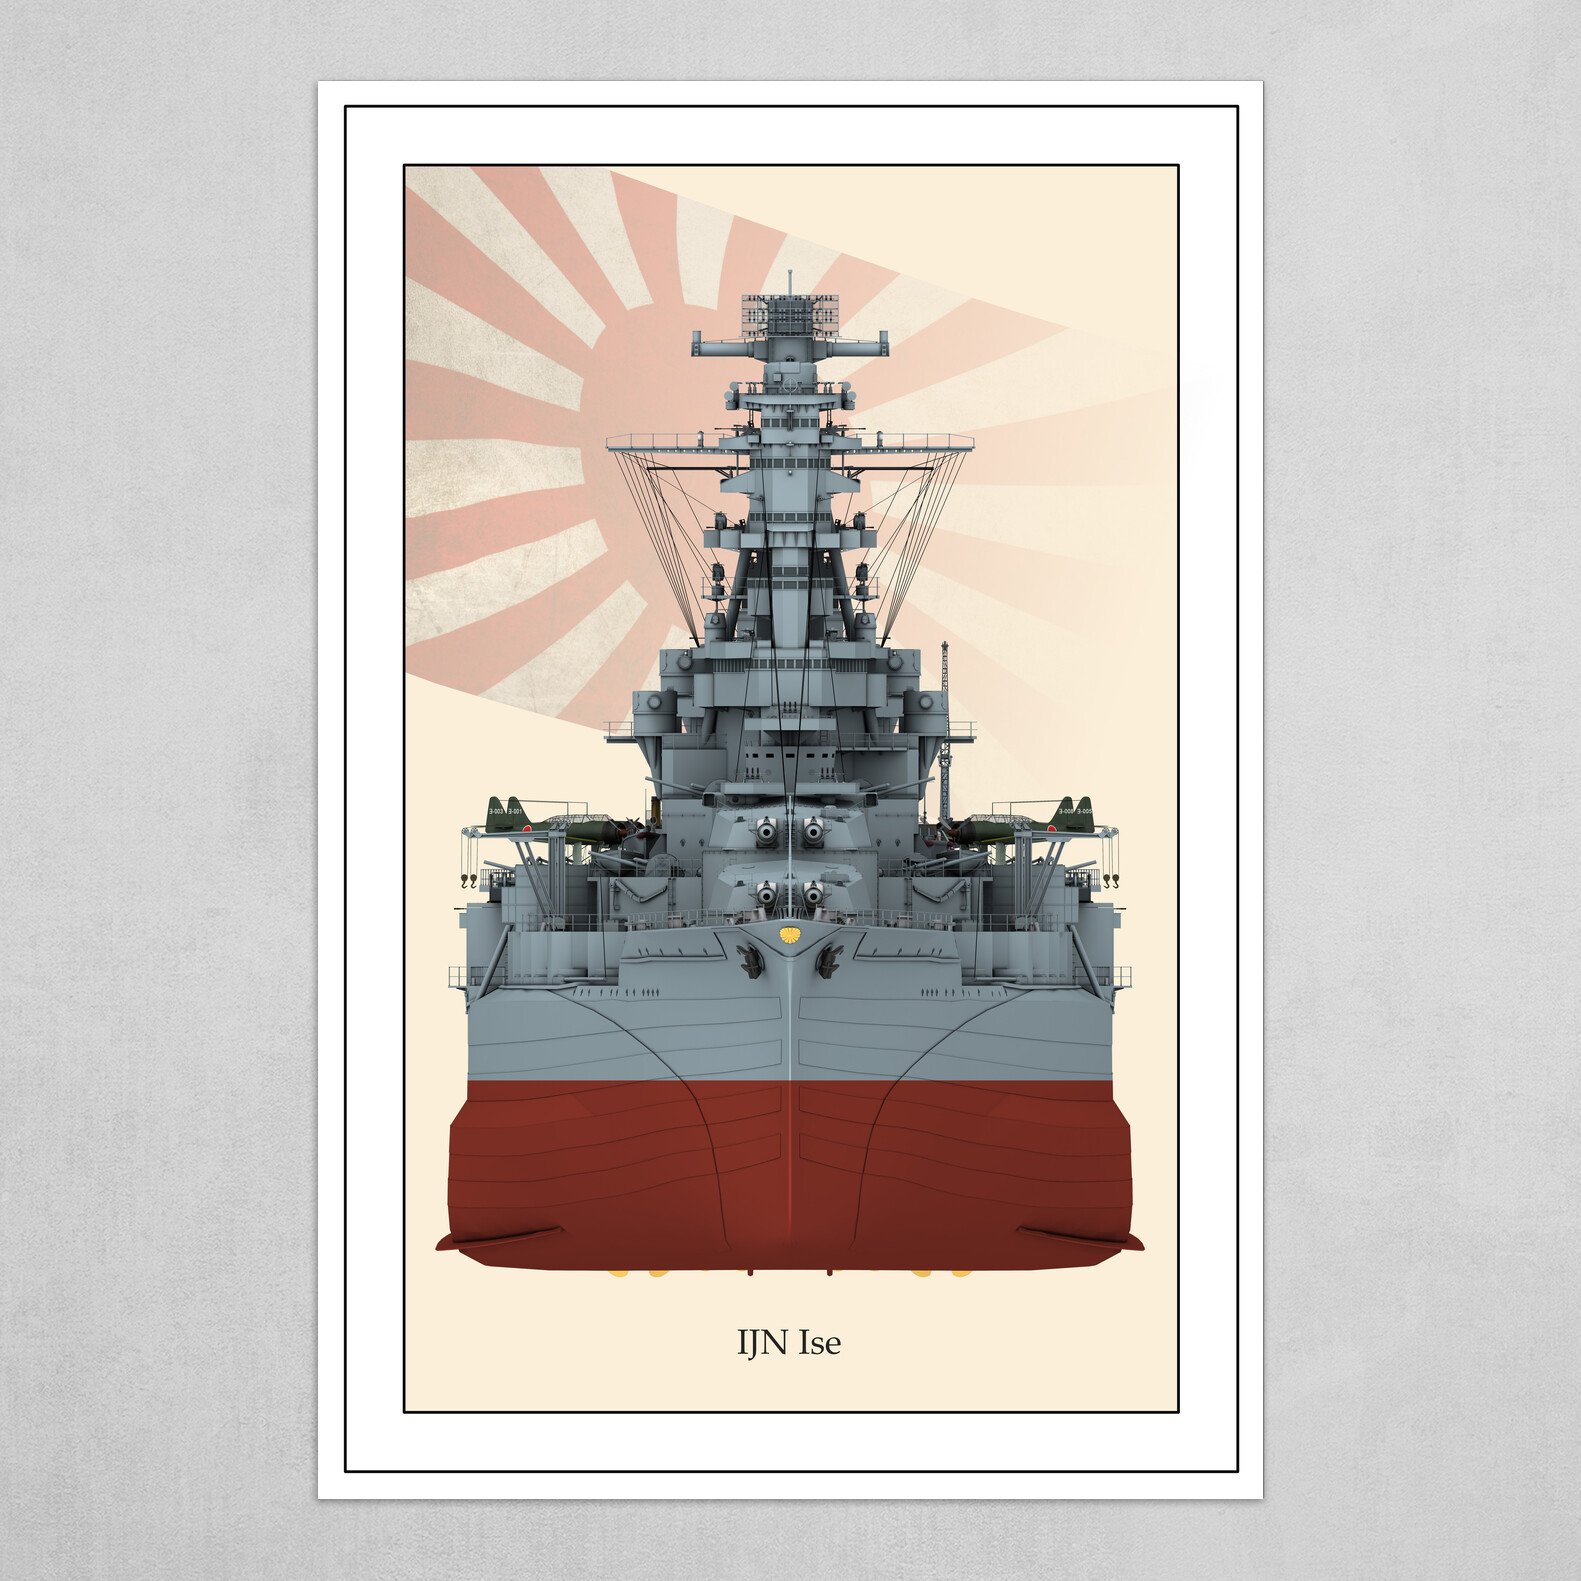 IJN Ise - front view